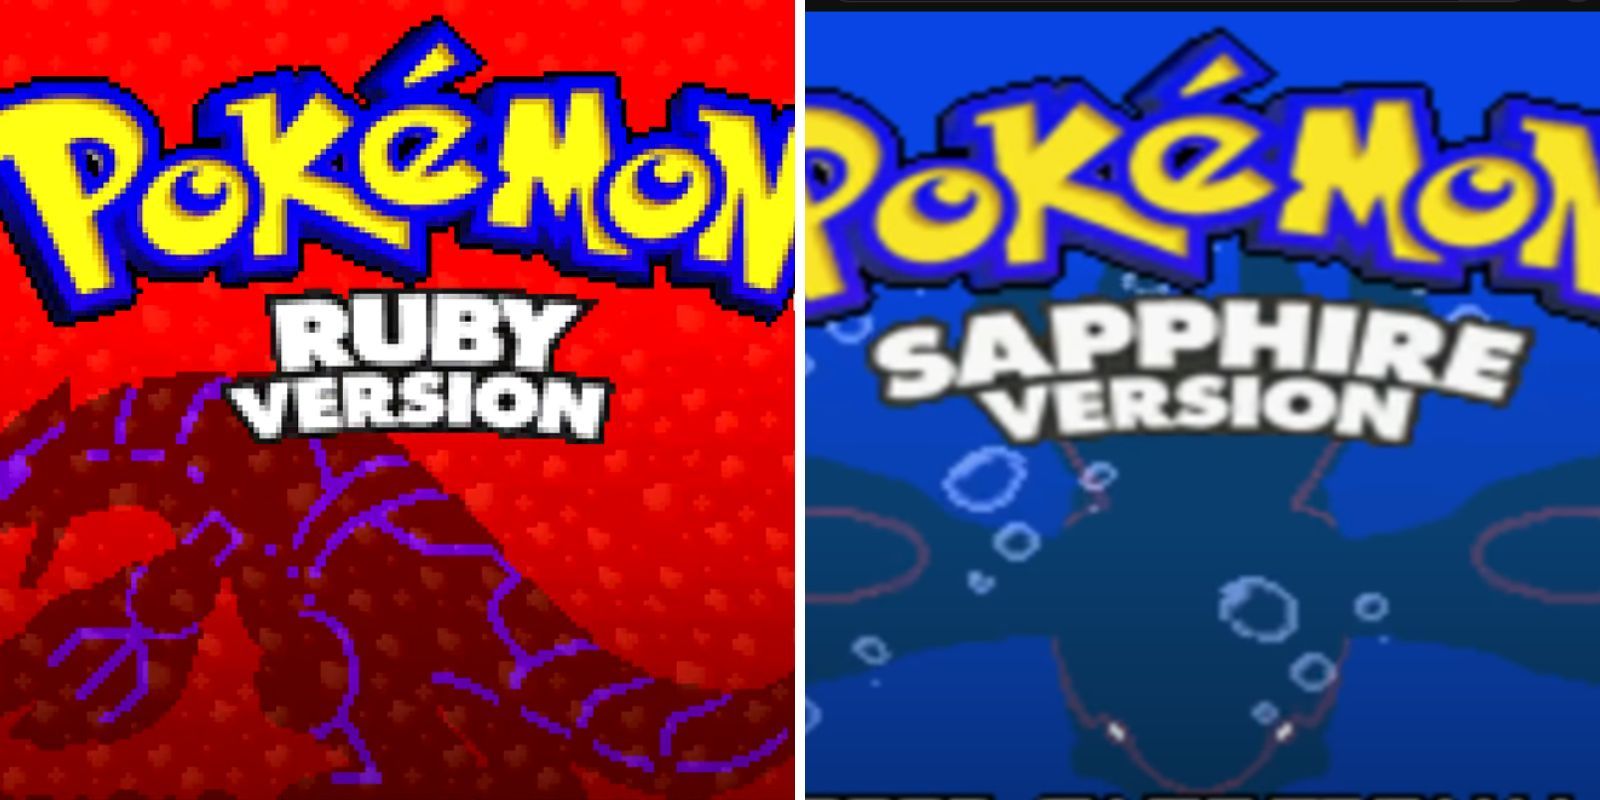 The Pokemon character is showing the Ruby and Sapphire version titles.